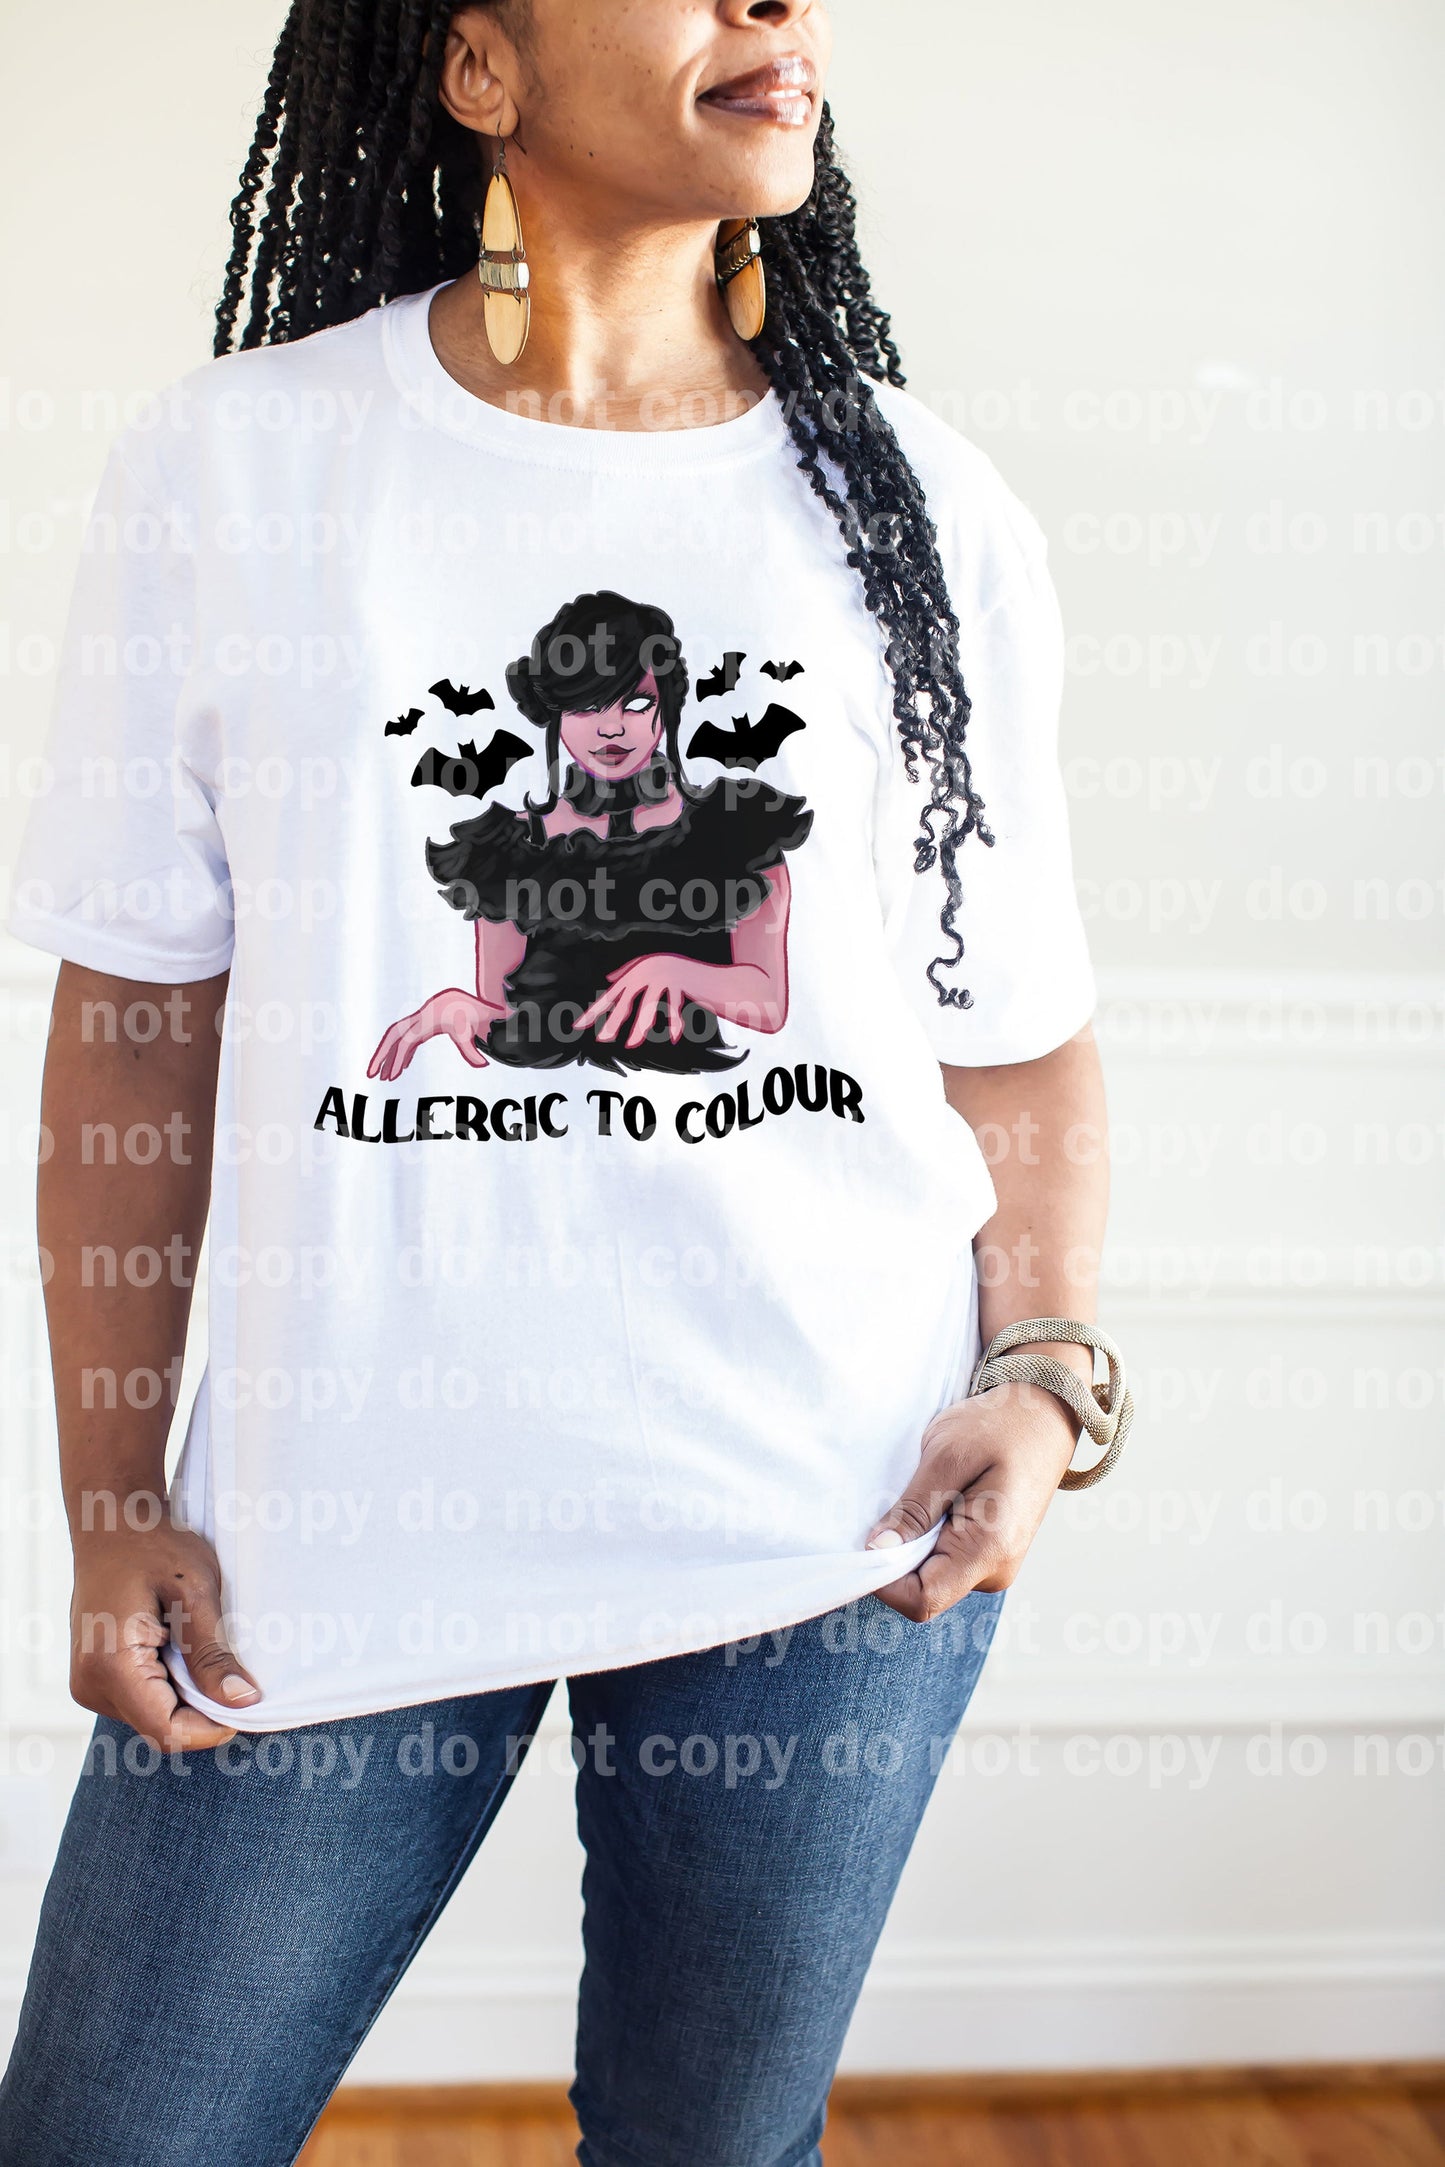 Allergic To Colour Dream Print or Sublimation Print